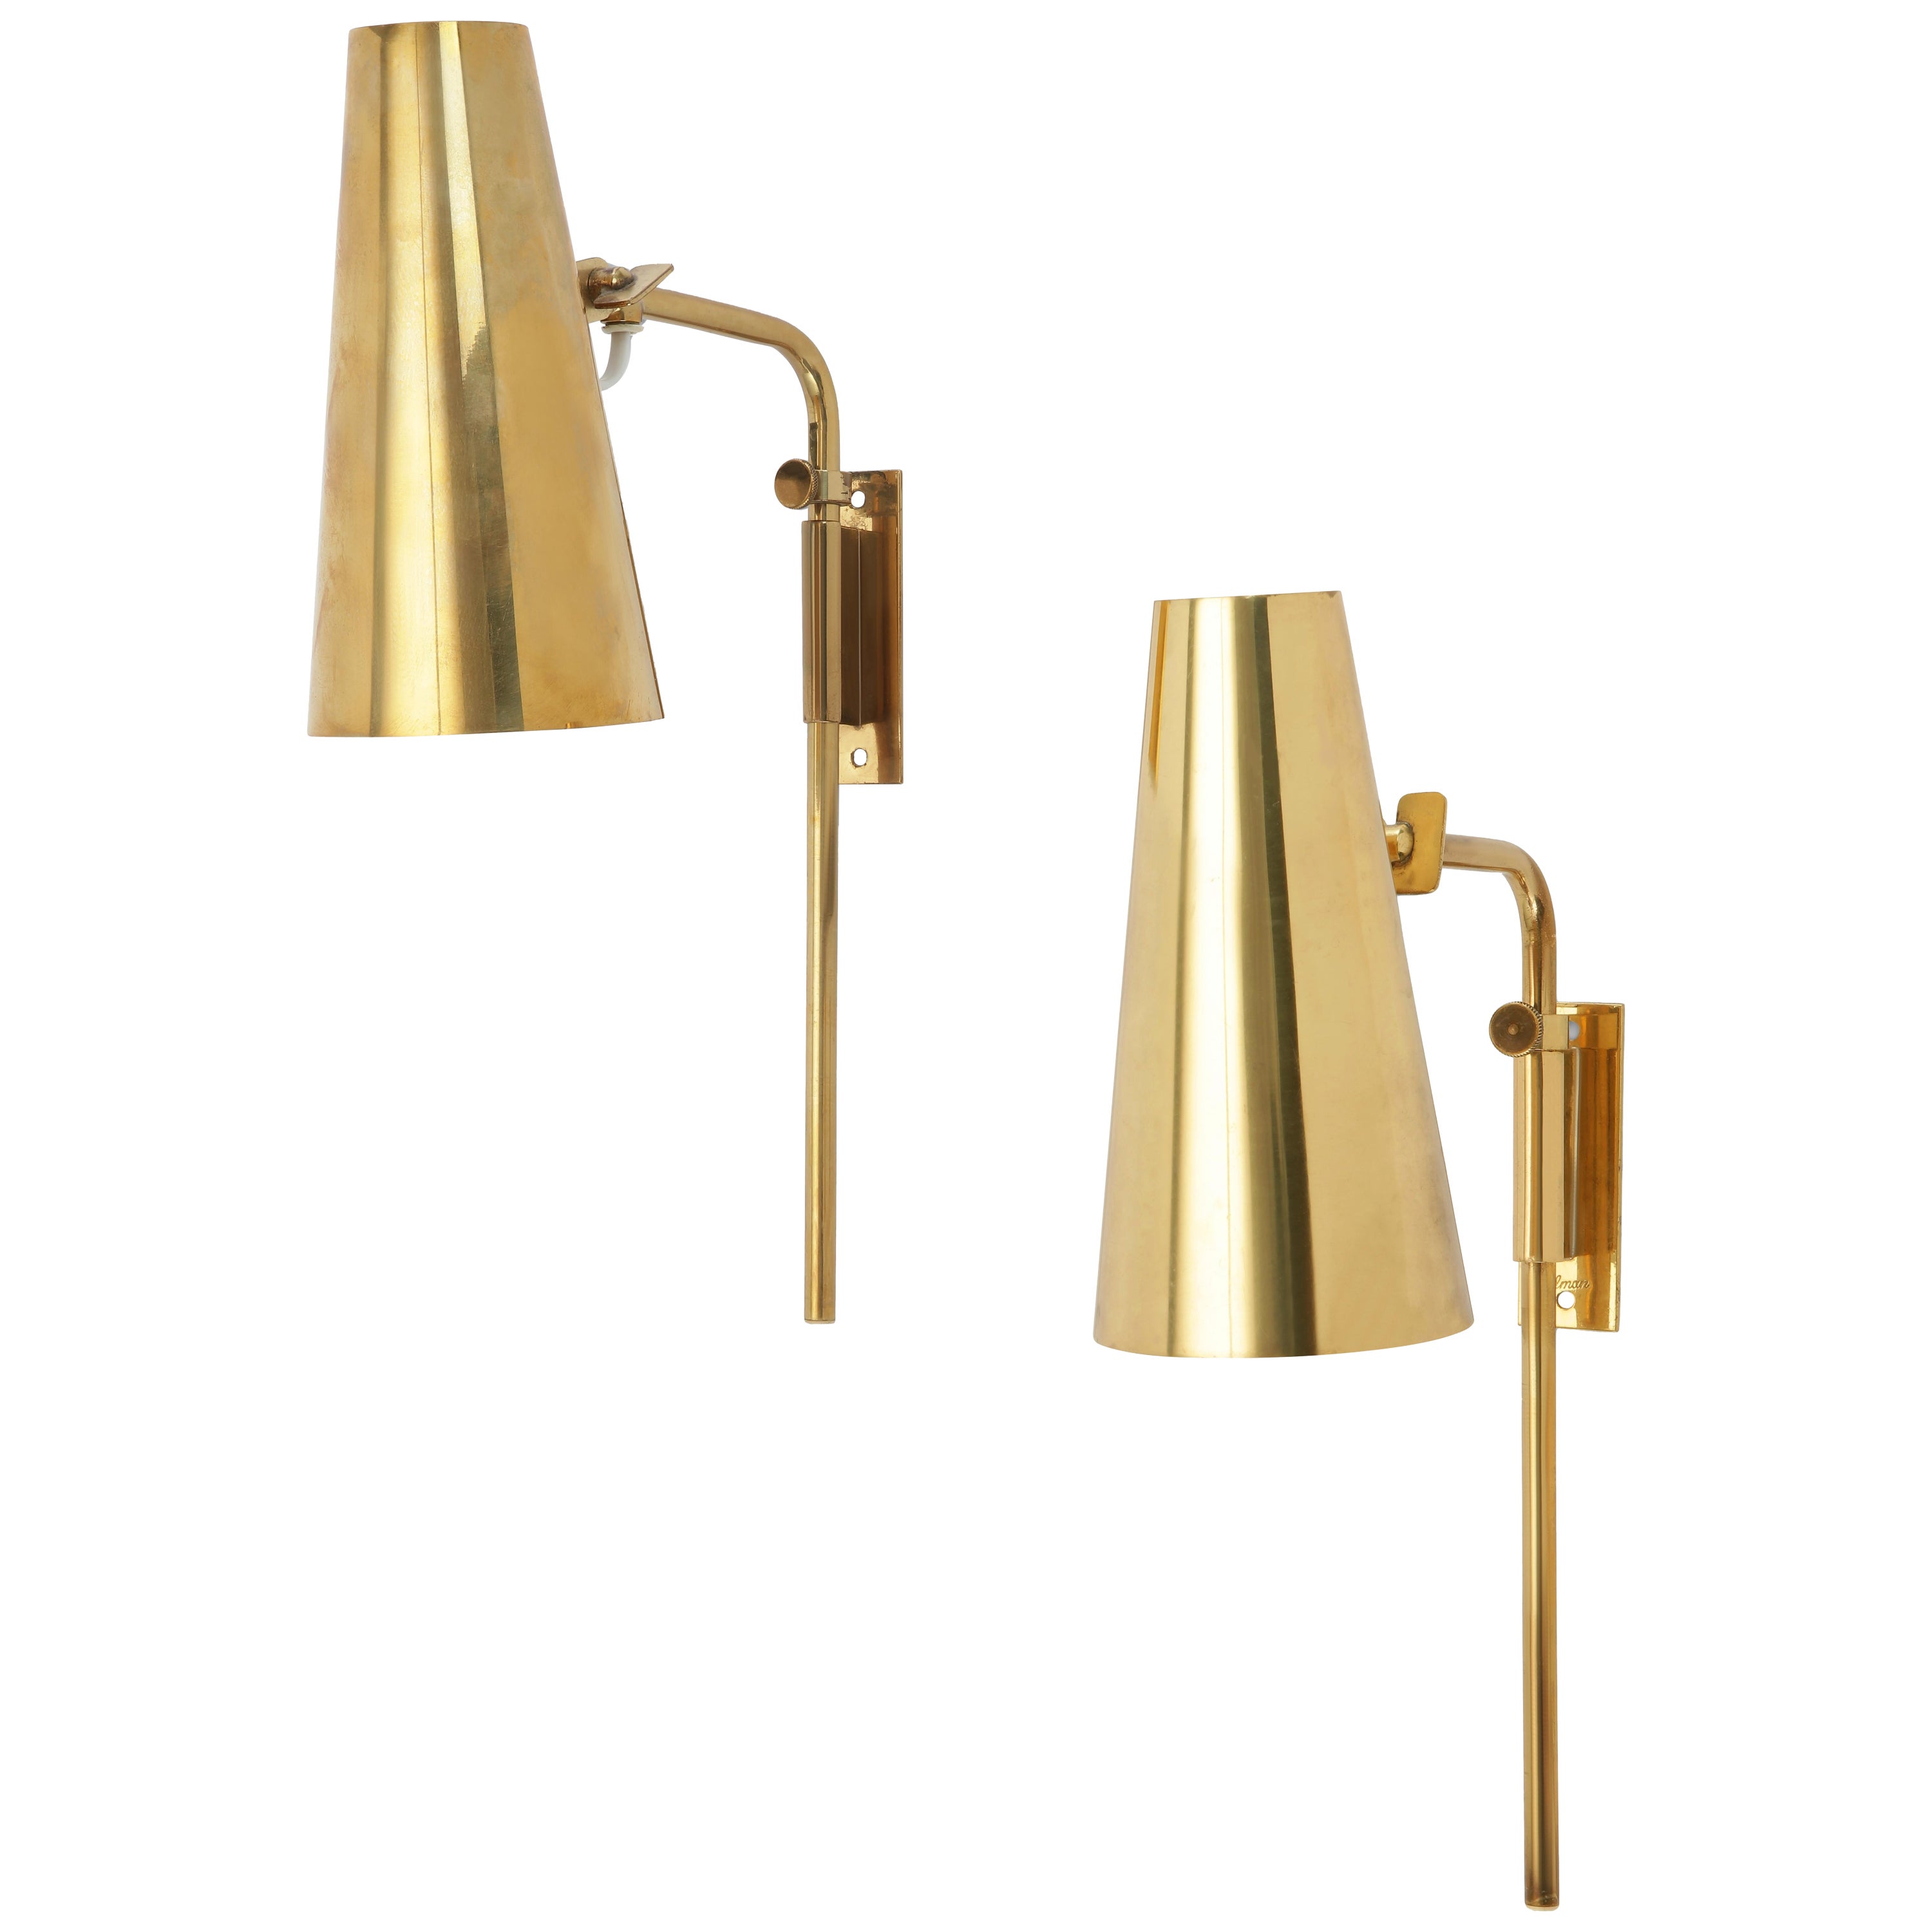 Pair of Rare Brass Paavo Tynell Wall Lights for Taito Oy, Finland, 1950s For Sale